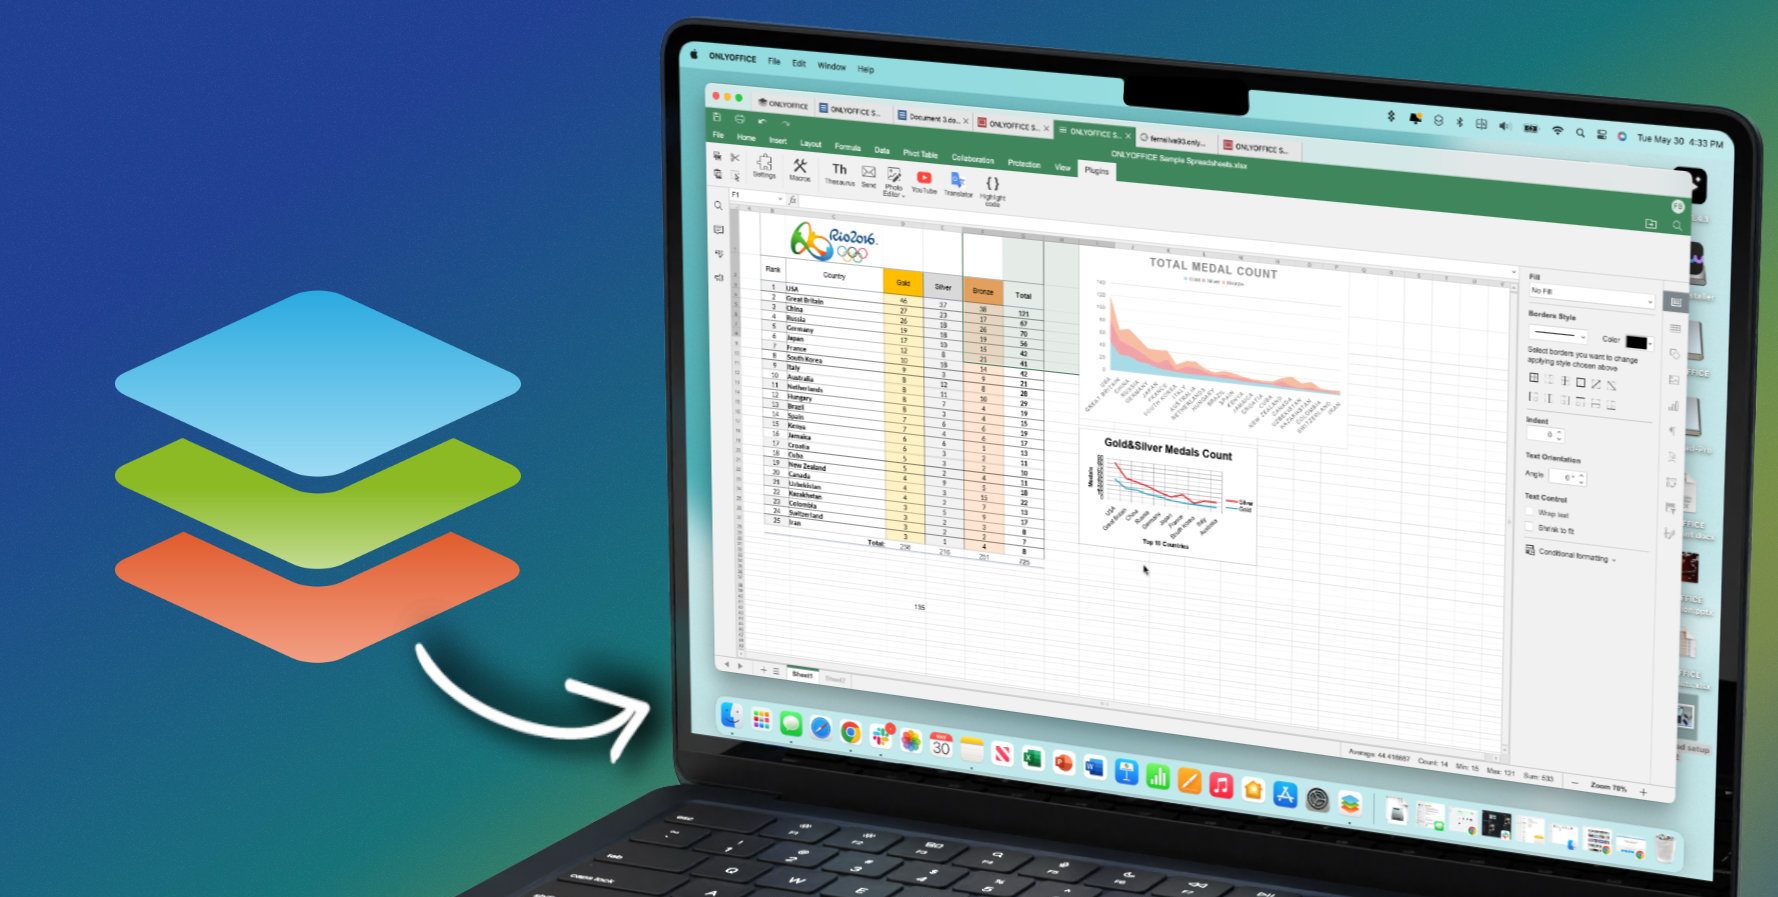 Hands-on with a powerful alternative to Apples iWork and Microsoft Office [Video]